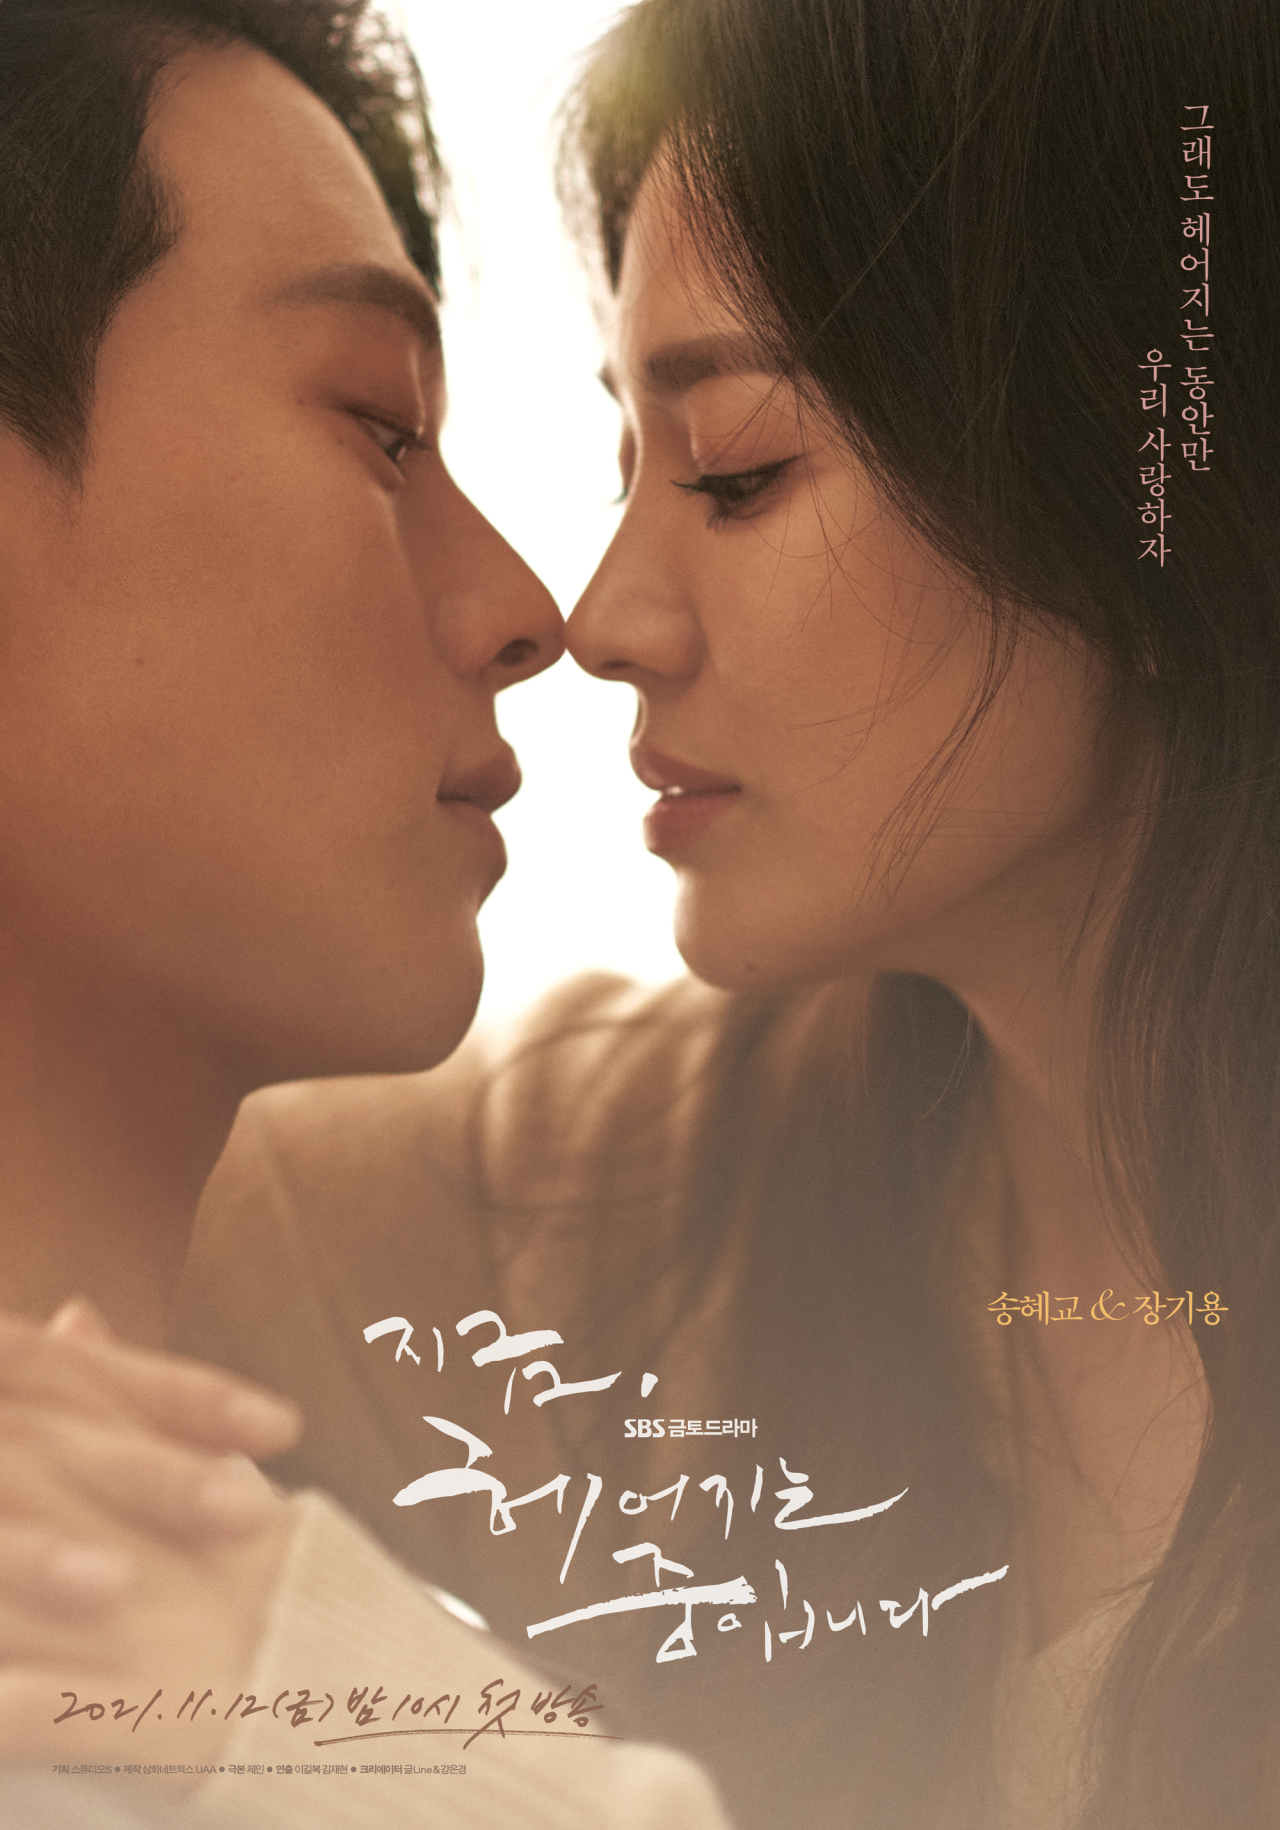 Song Hye-kyo returns with heartwarming drama Now We Are Breaking hq image